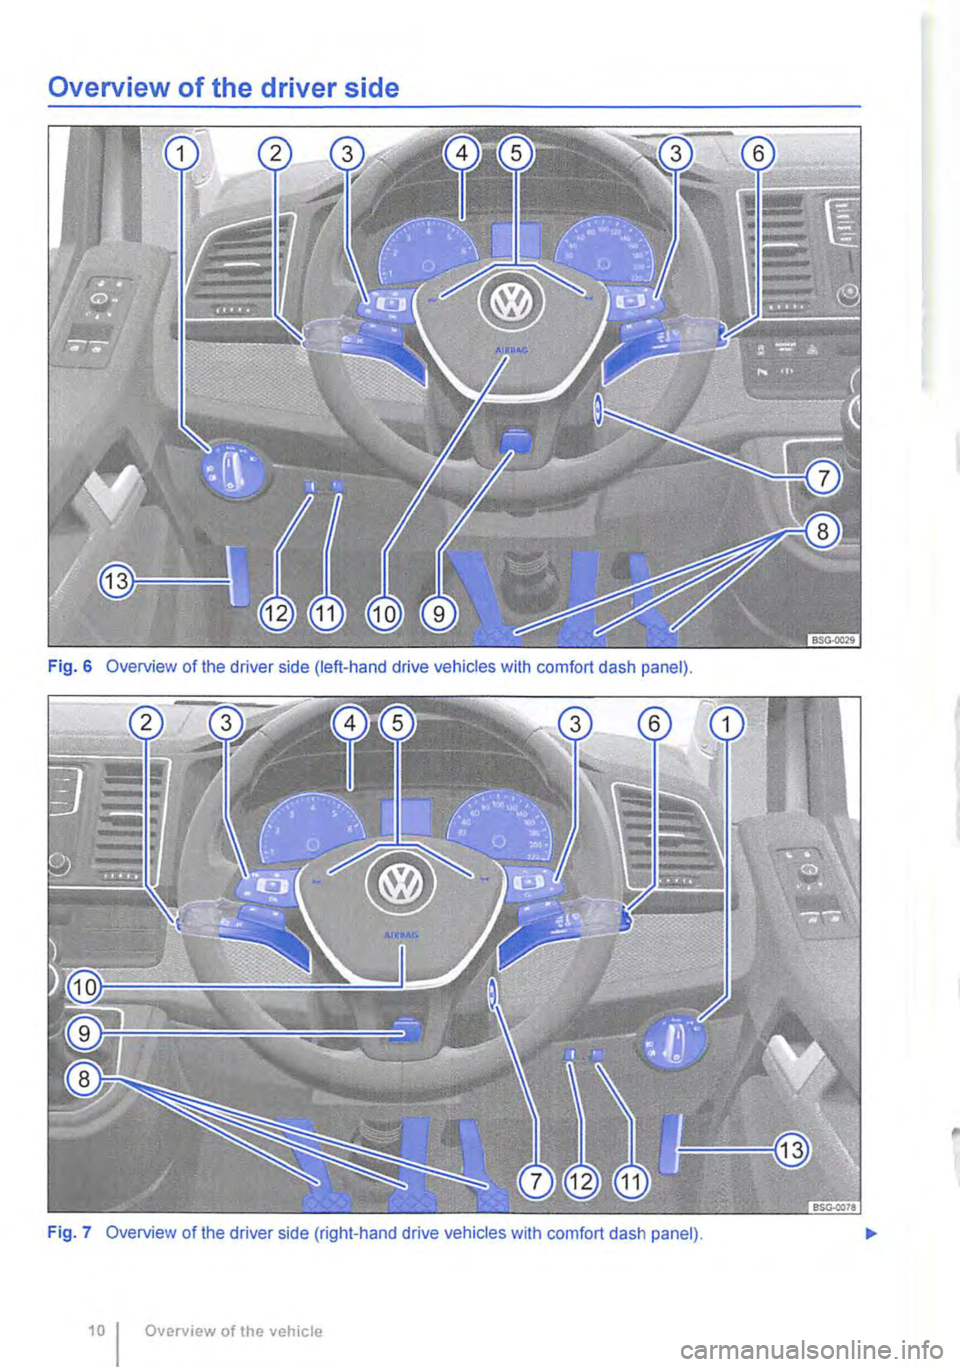 VOLKSWAGEN TRANSPORTER 2014  Owners Manual Overview of the driver side 
Fig. 6 Overview of the driver side (left-hand drive vehicles with comfort dash panel). 
Fig. 7 Overview of the driver side (right-hand drive vehicles with comfort dash pan